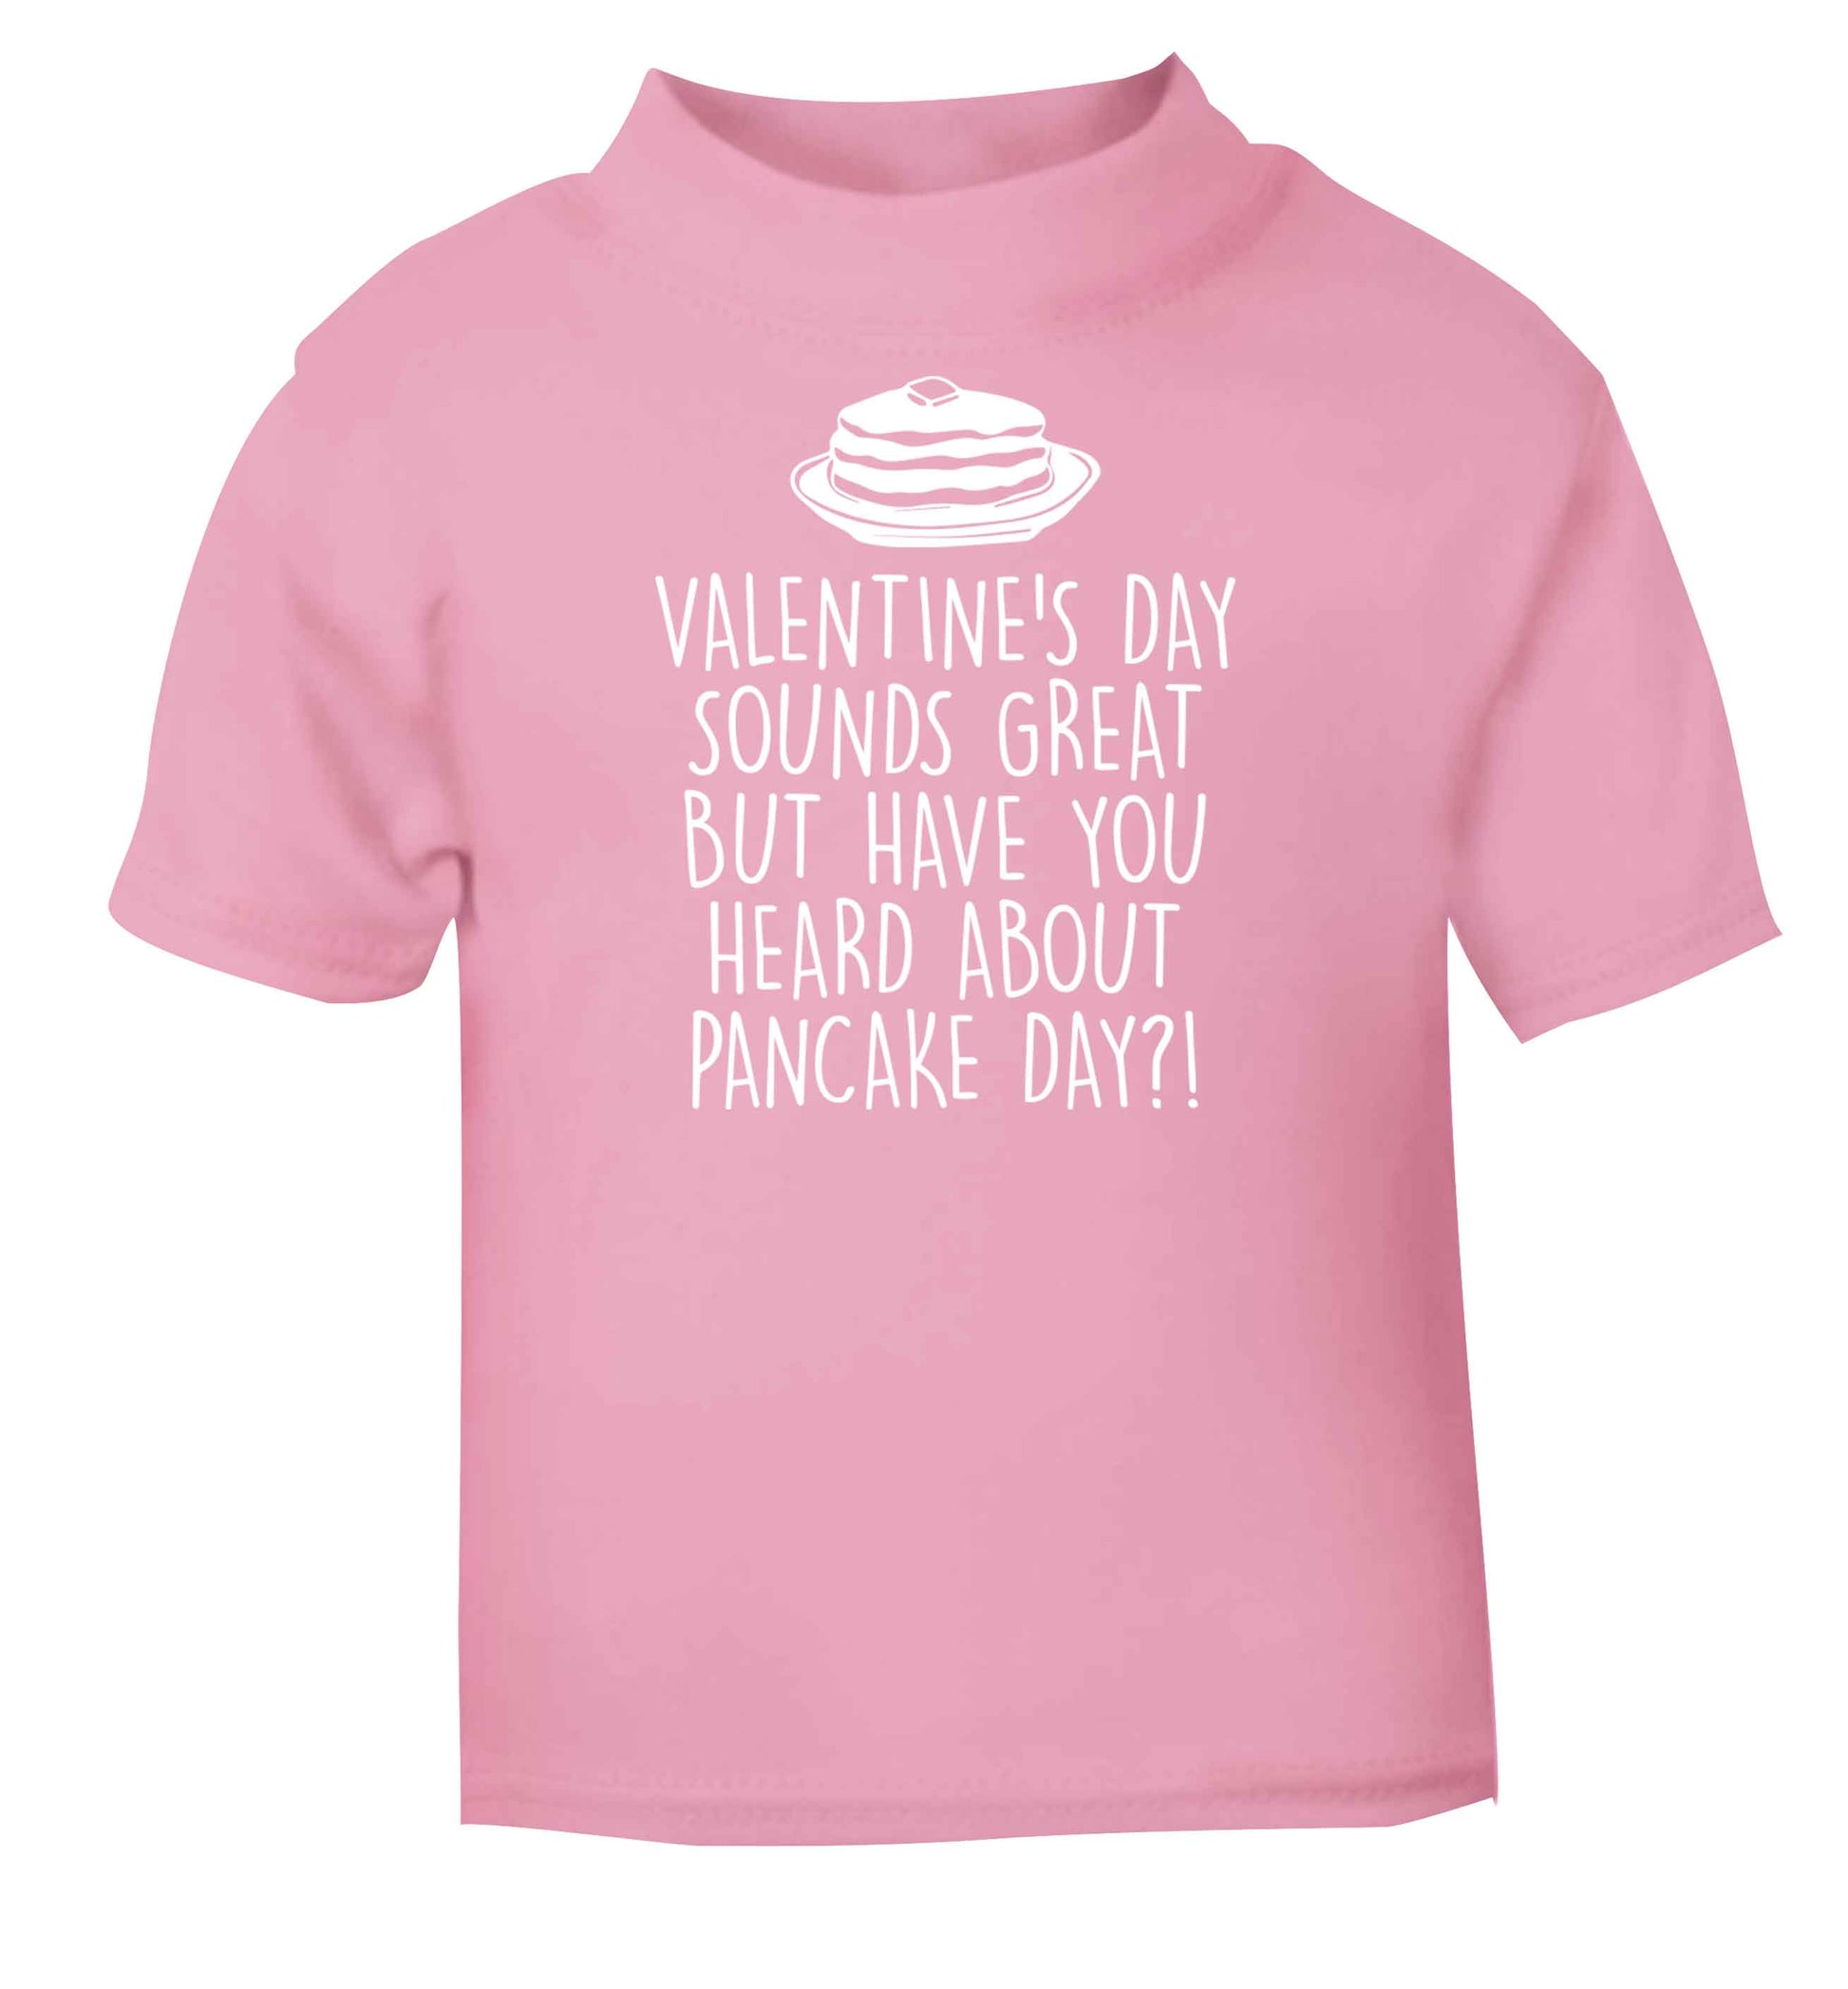 Valentine's day sounds great but have you heard about pancake day?! light pink baby toddler Tshirt 2 Years